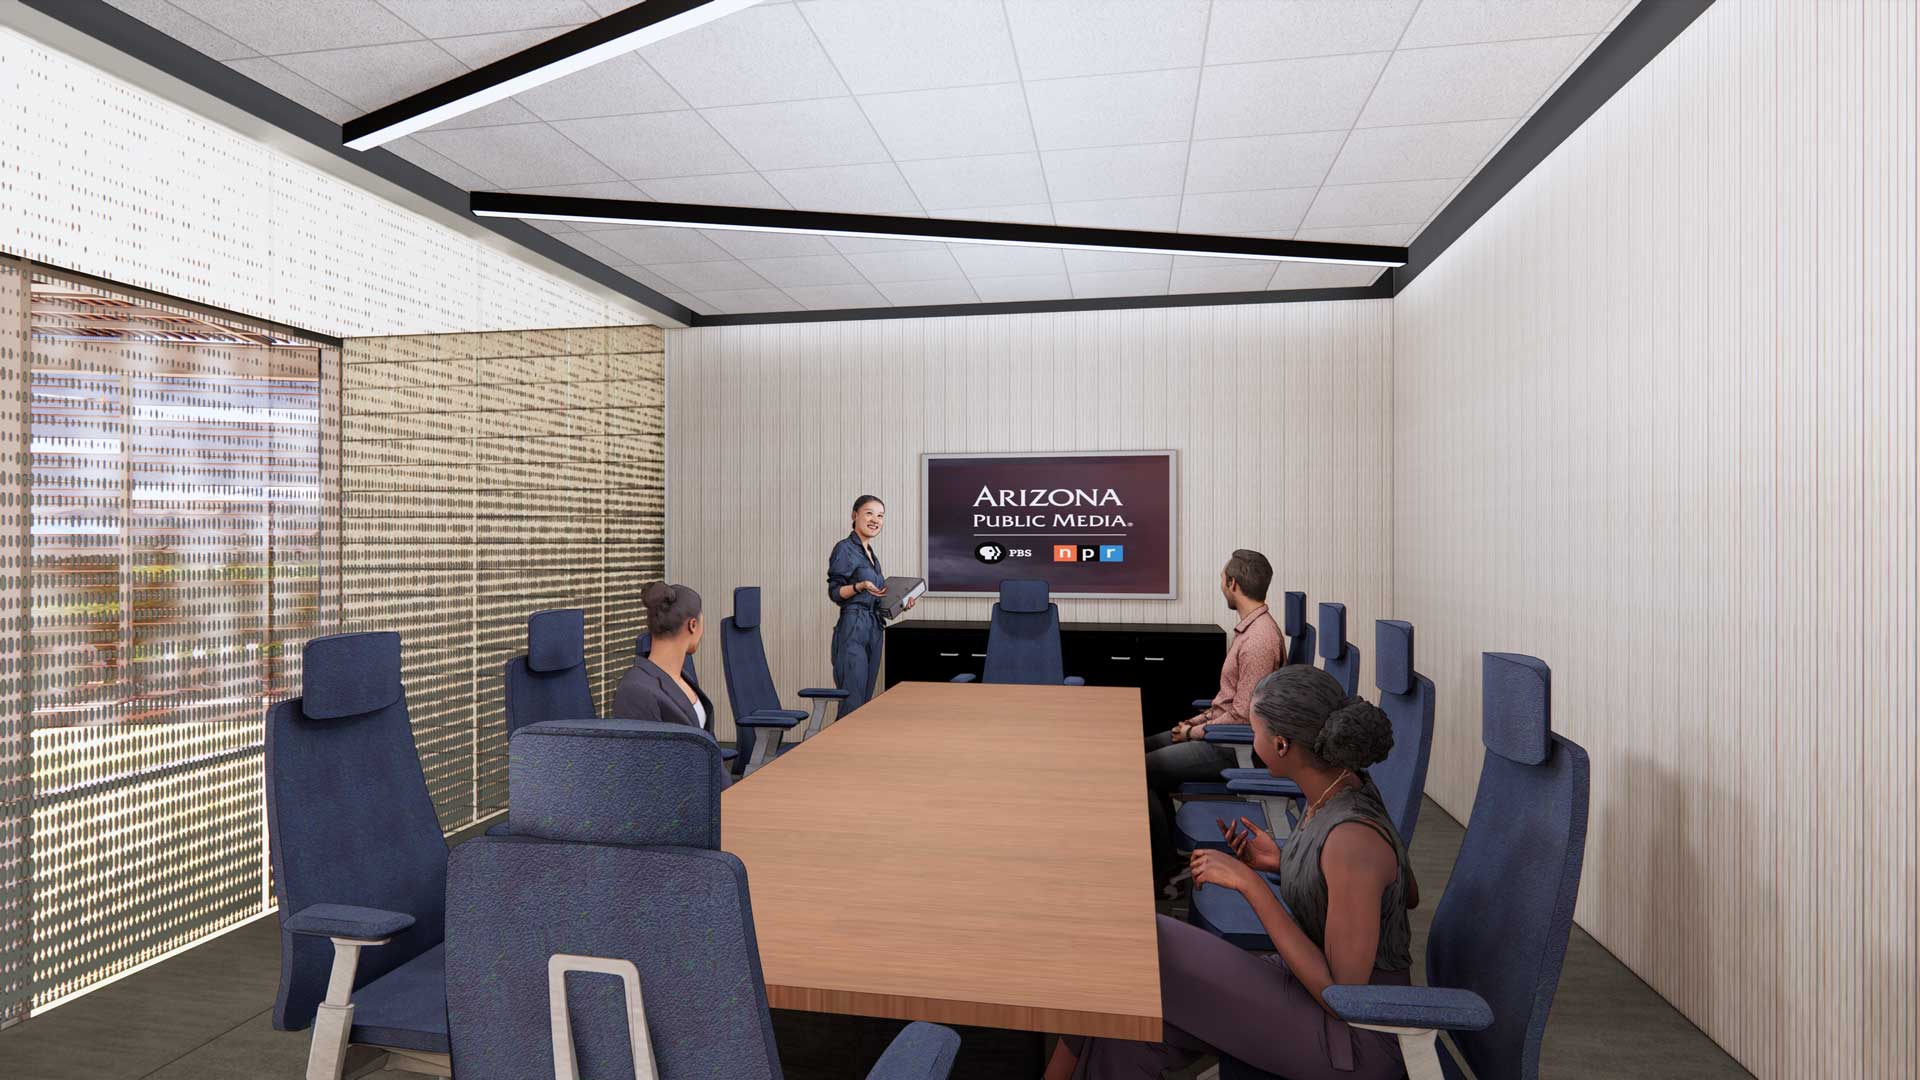 South Conference Room